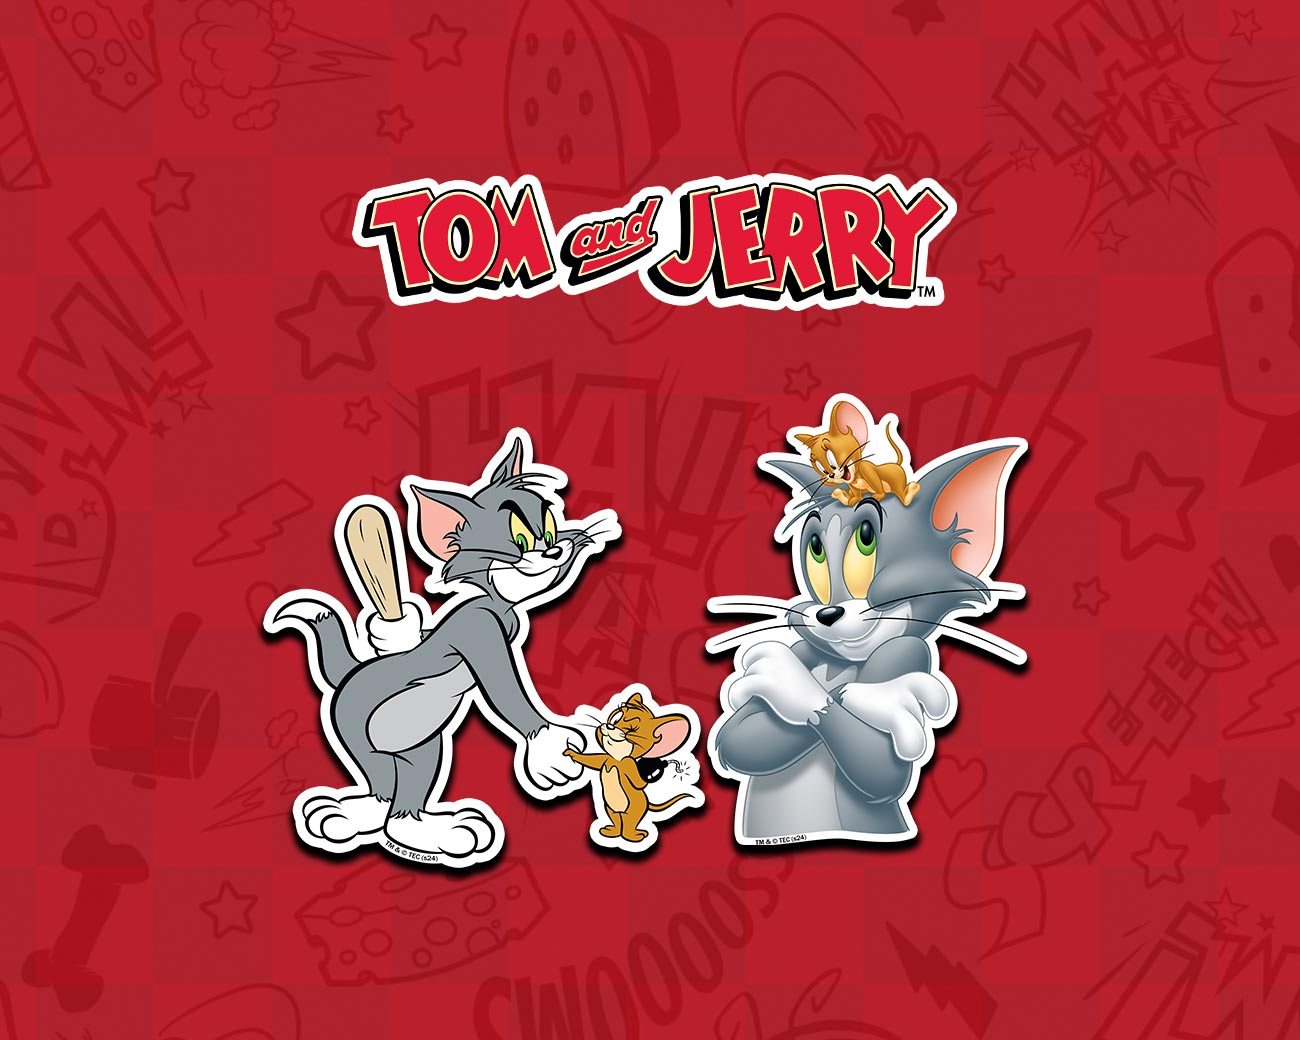 Tom & Jerry Wooden Jigsaw Puzzles - Officially Licensed